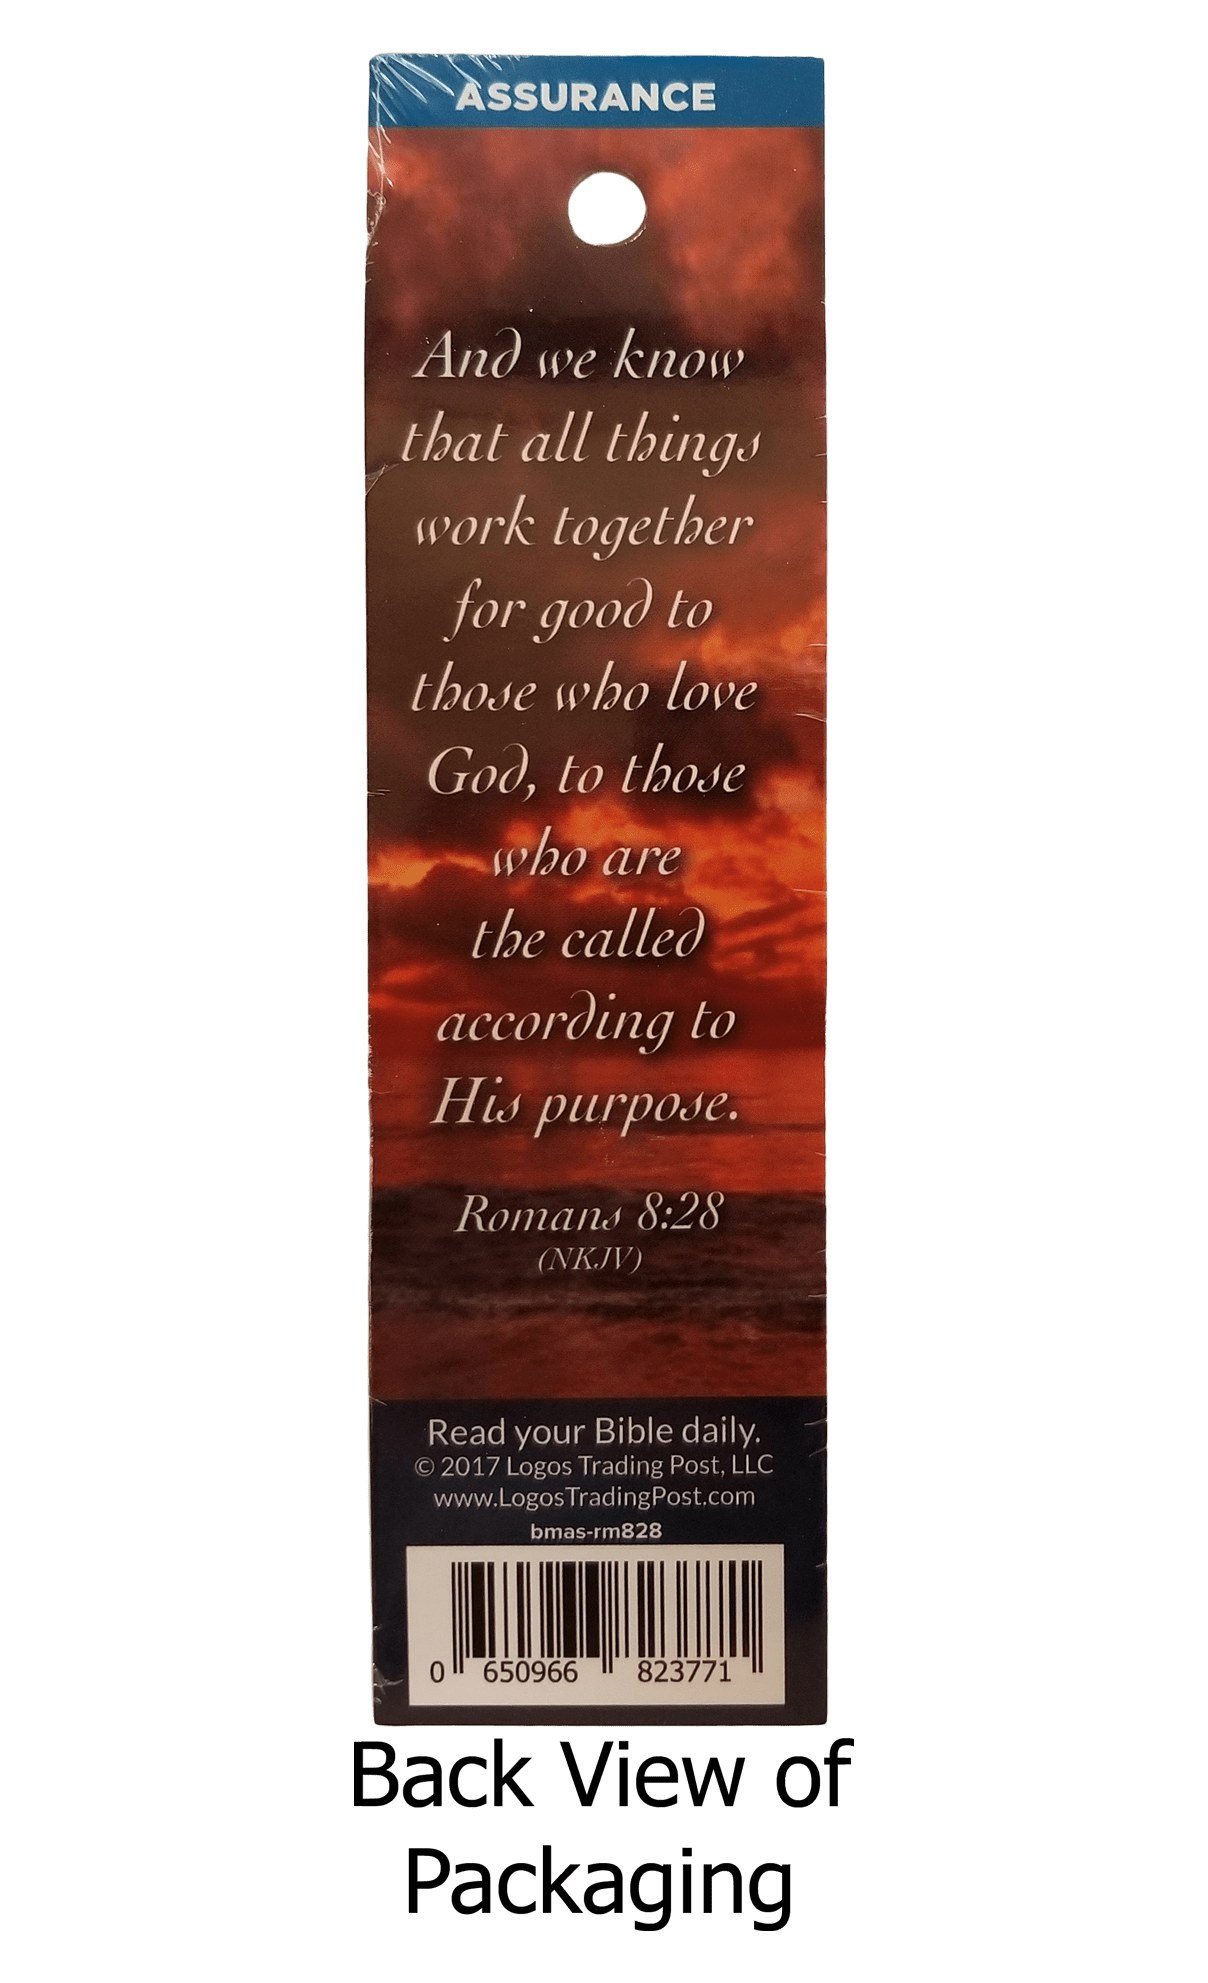 All Things Work Together for Good Bookmarks, Pack of 25 - Christian Bookmarks